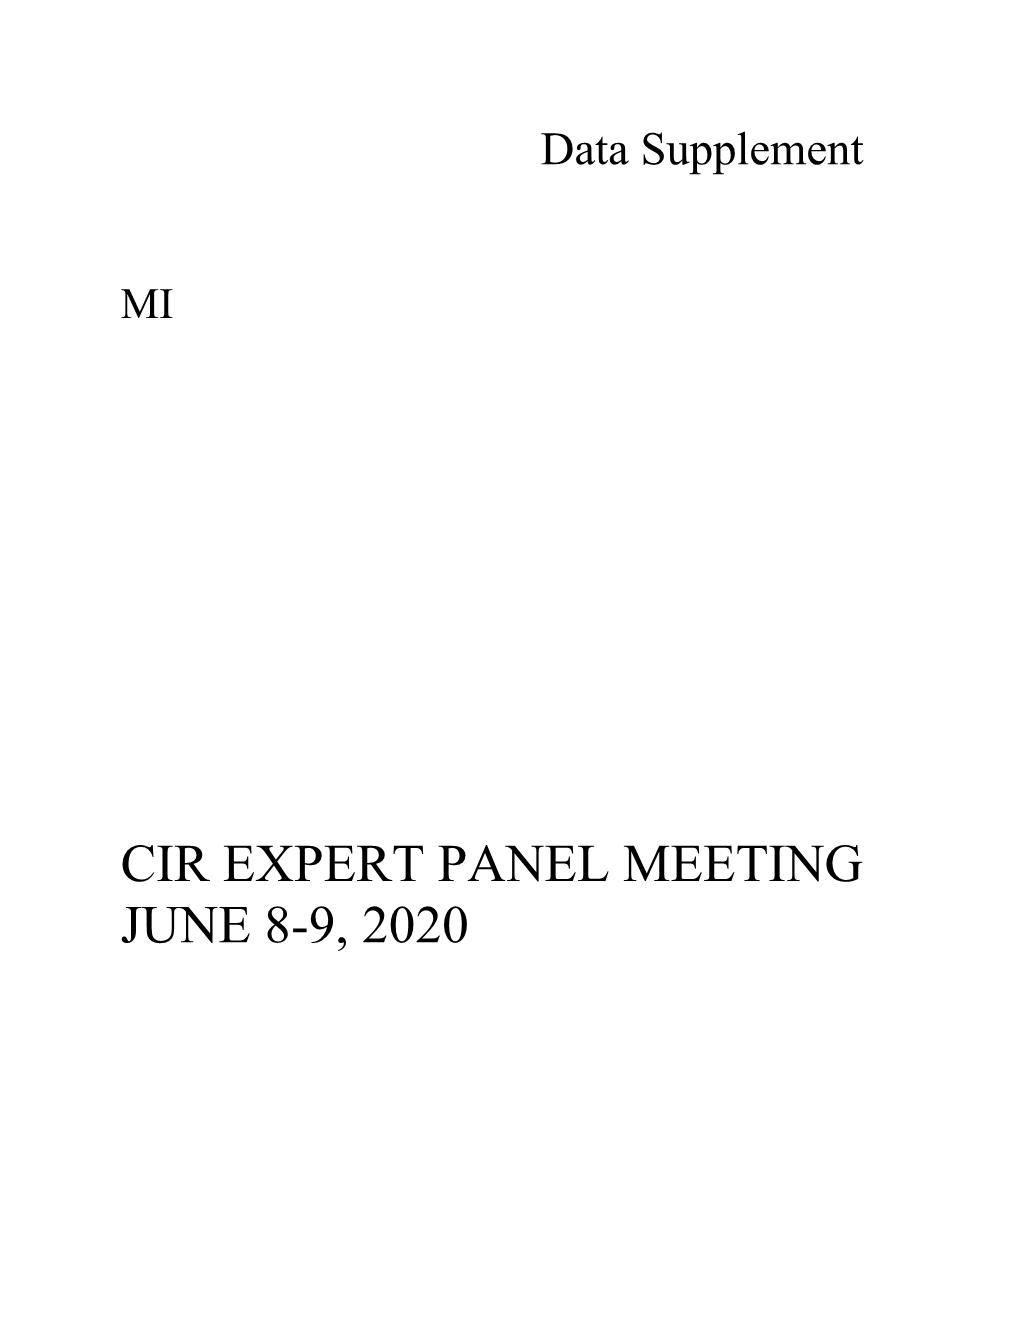 CIR EXPERT PANEL MEETING JUNE 8-9, 2020 Distributed for Comment Only -- Do Not Cite Or Quote